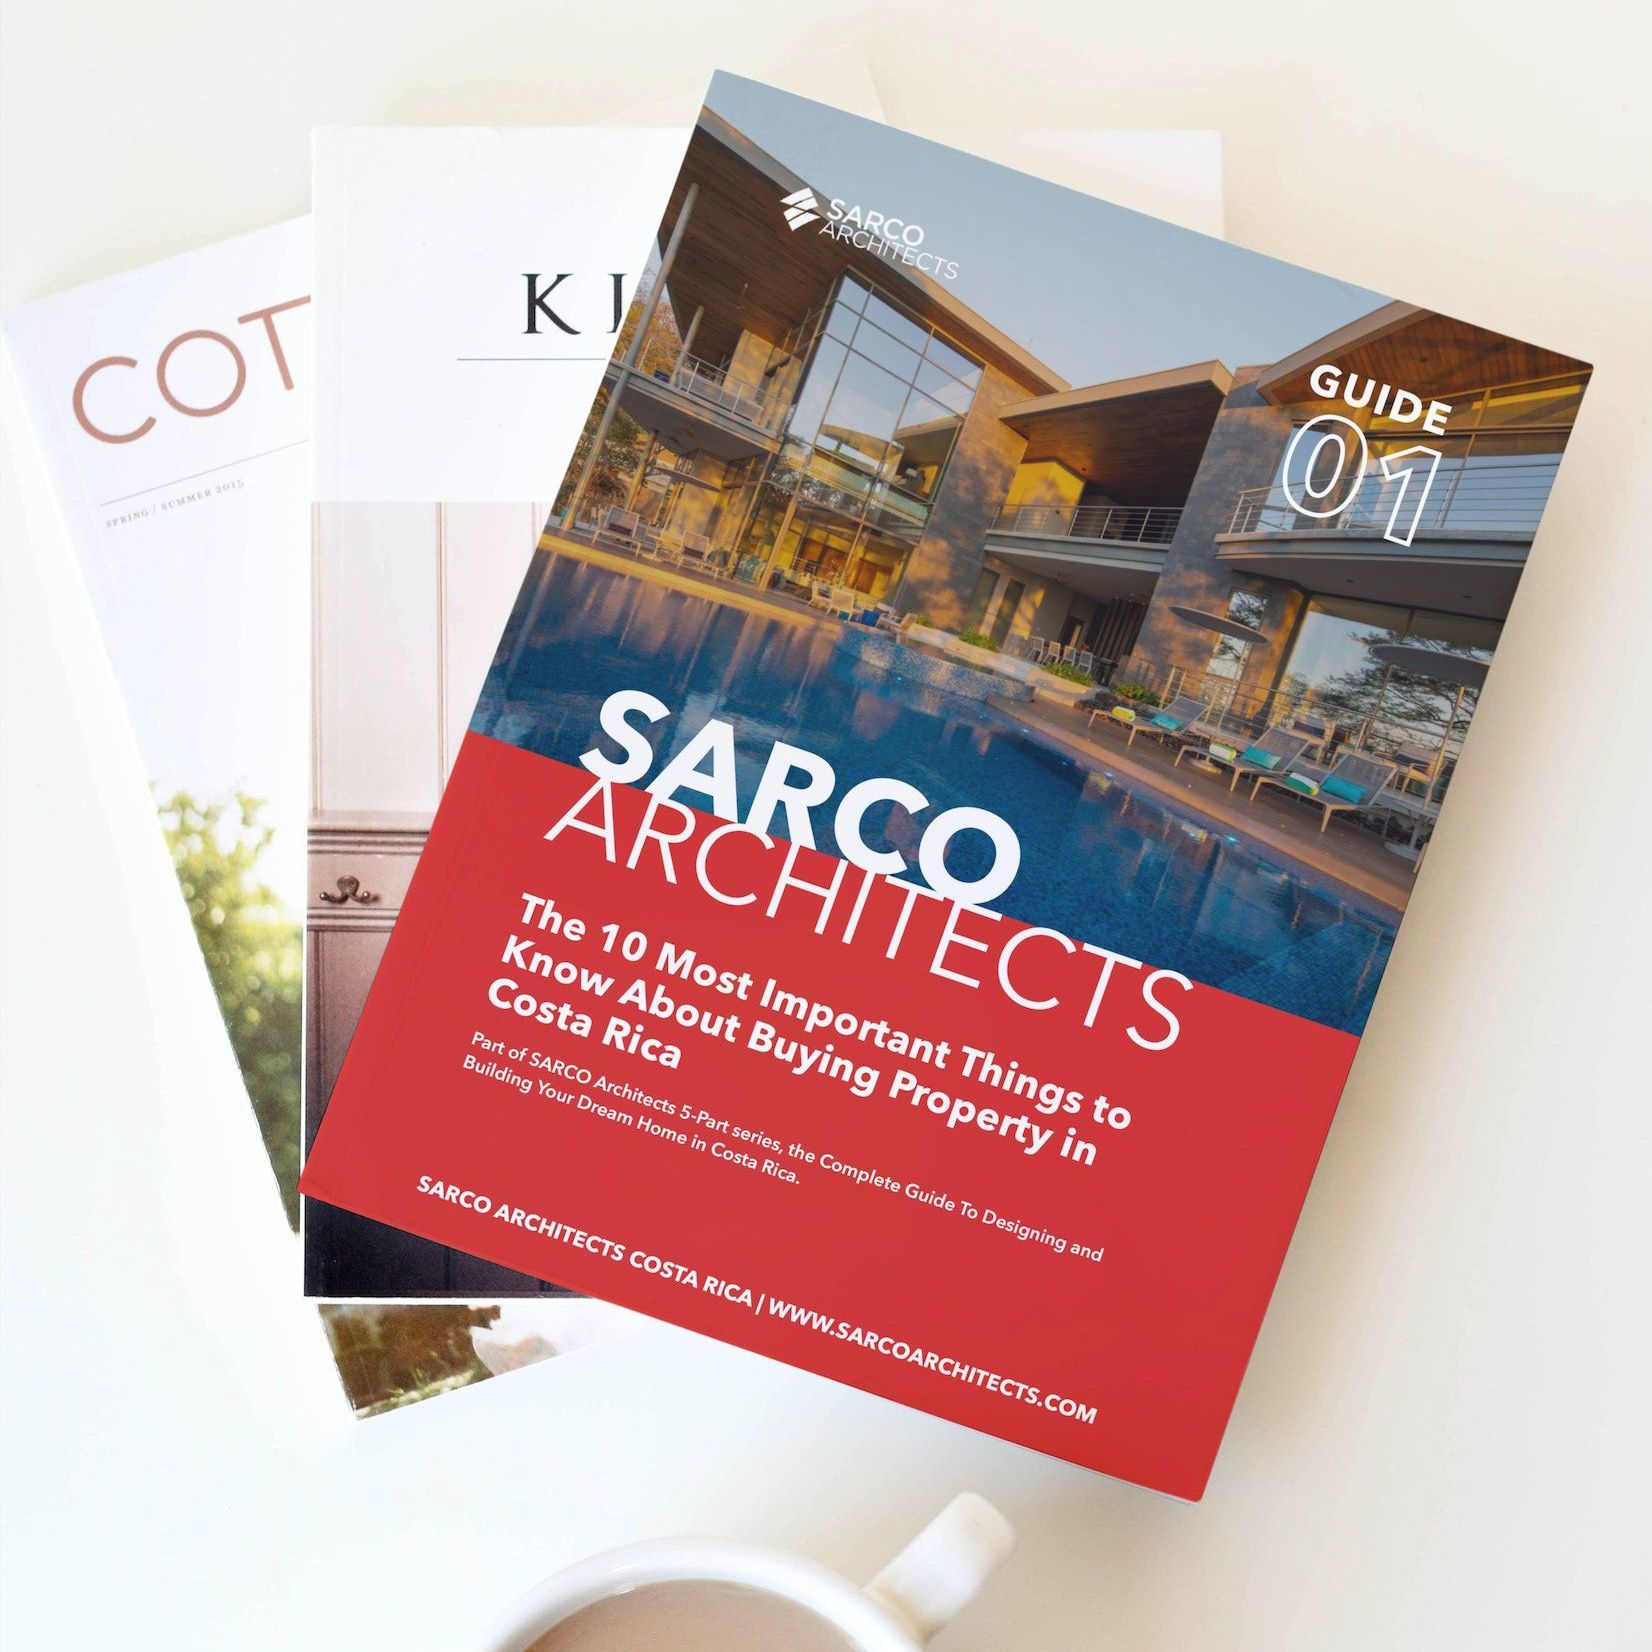 a book titled sarco architects the 10 most important things to know about buying property in costa rica